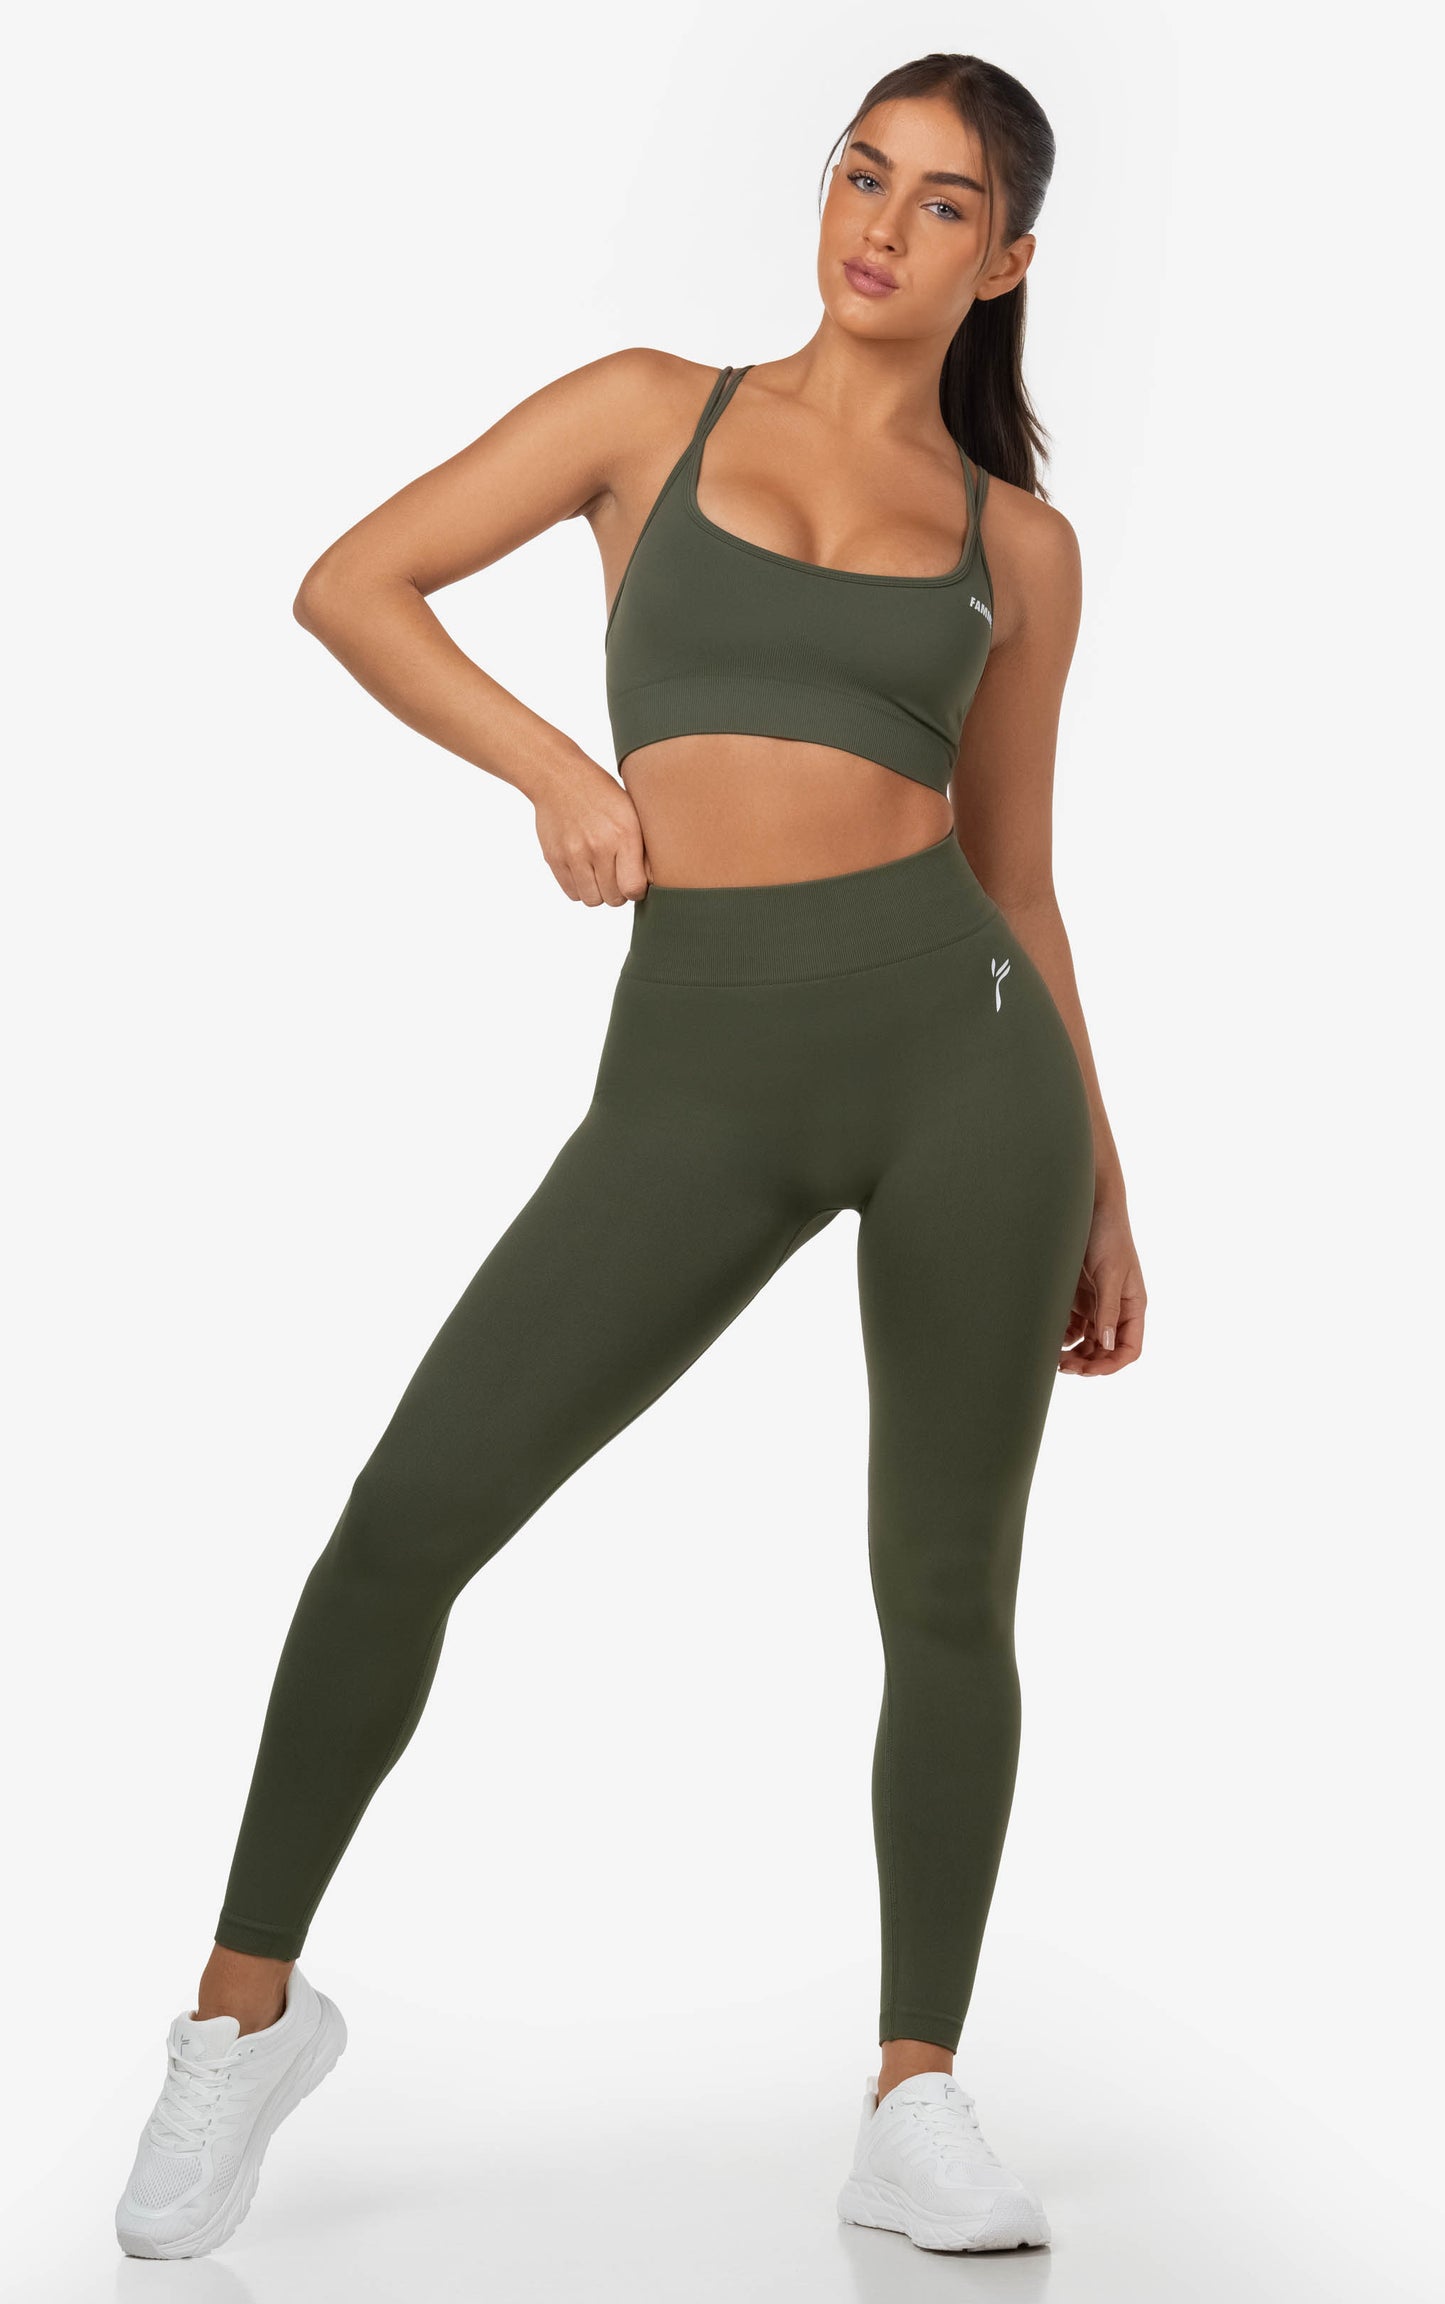 Green Lunge Sports Bra - for dame - Famme - Sports Bra